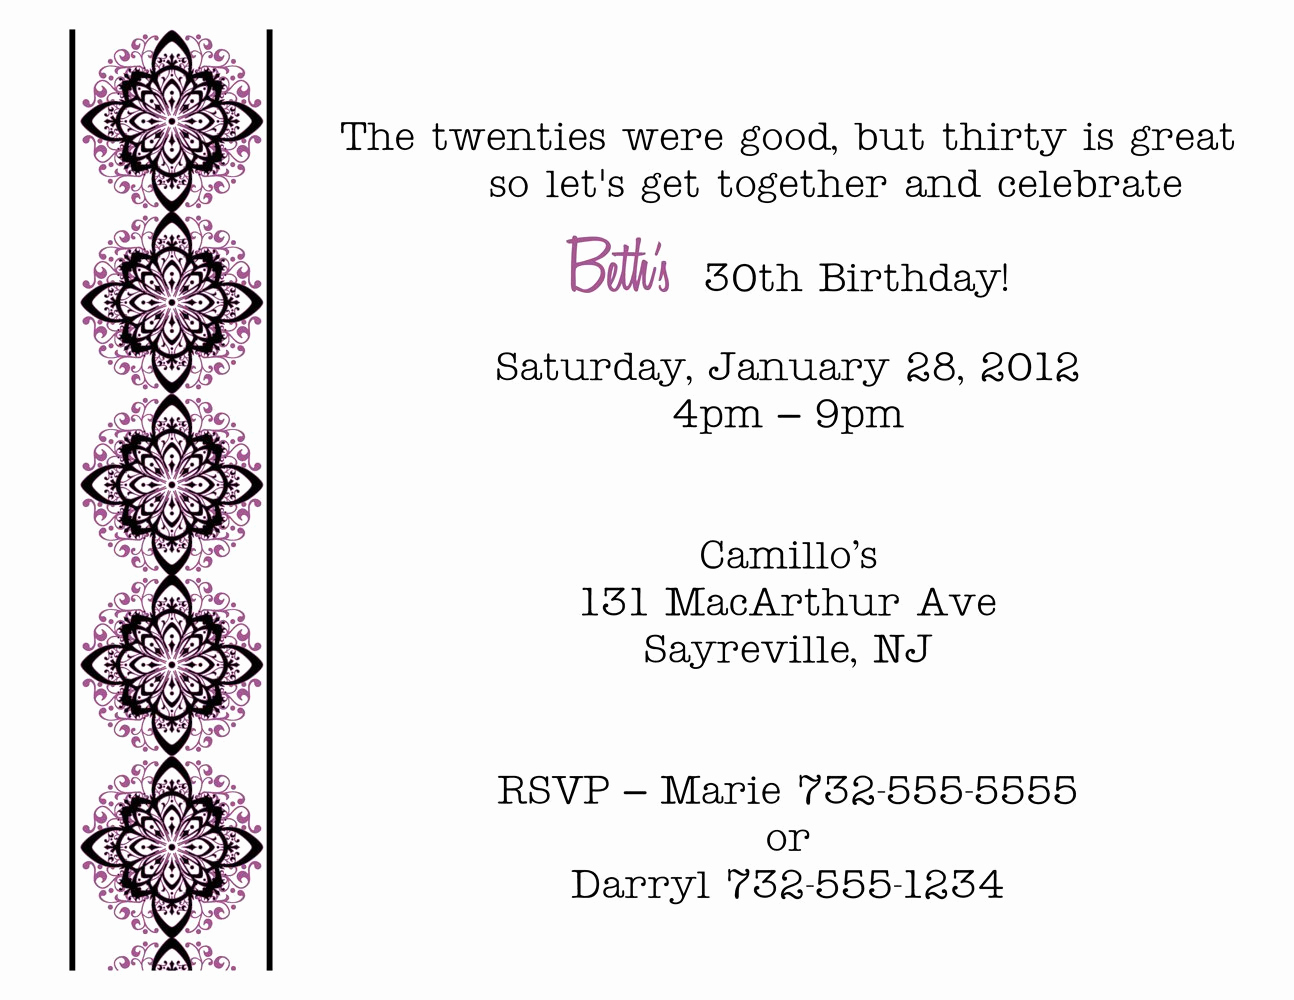 30th Birthday Party Invitation Wording Awesome 30th Birthday Quotes for Invitations Quotesgram